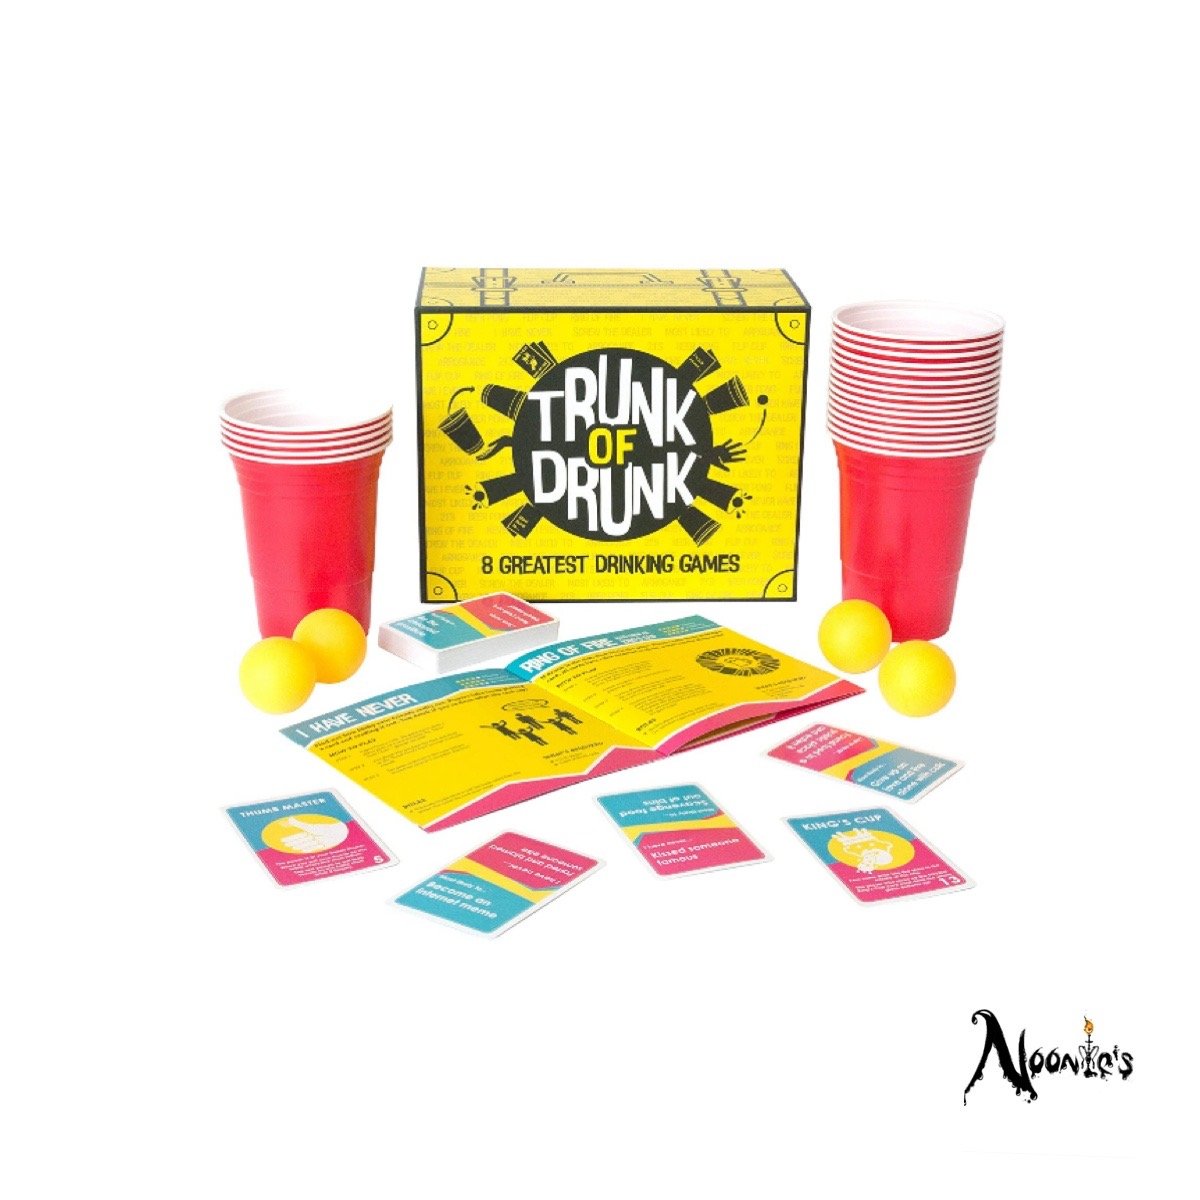 Image of The Ultimate drinking game set